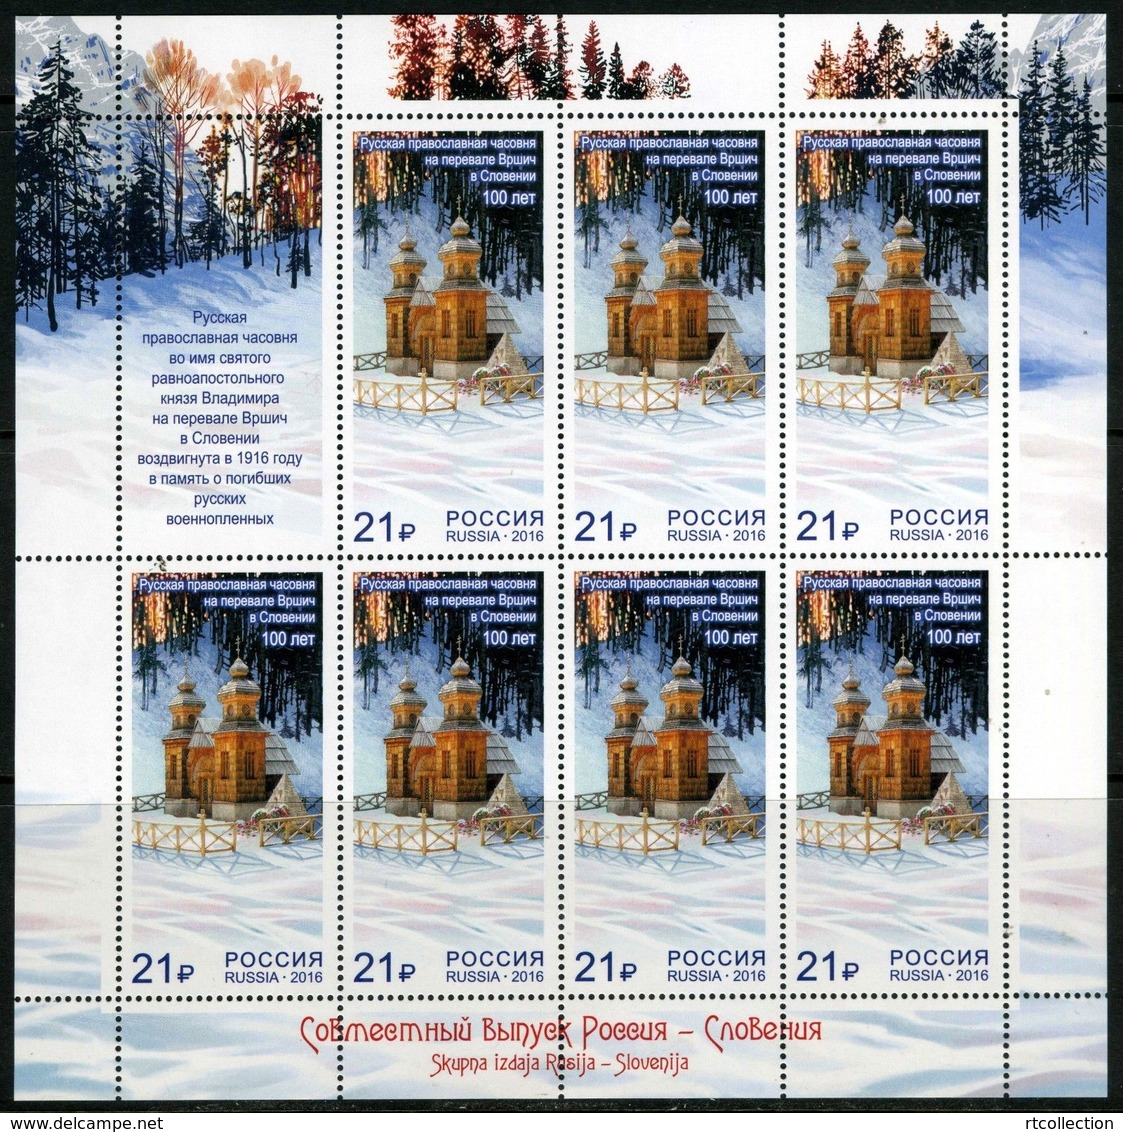 Russia 2016 Sheet Joint Issue Slovenia 100th Anniv Russian Orthodox Chapel Architecture Churches Cathedrals Stamps MNH - Hojas Completas